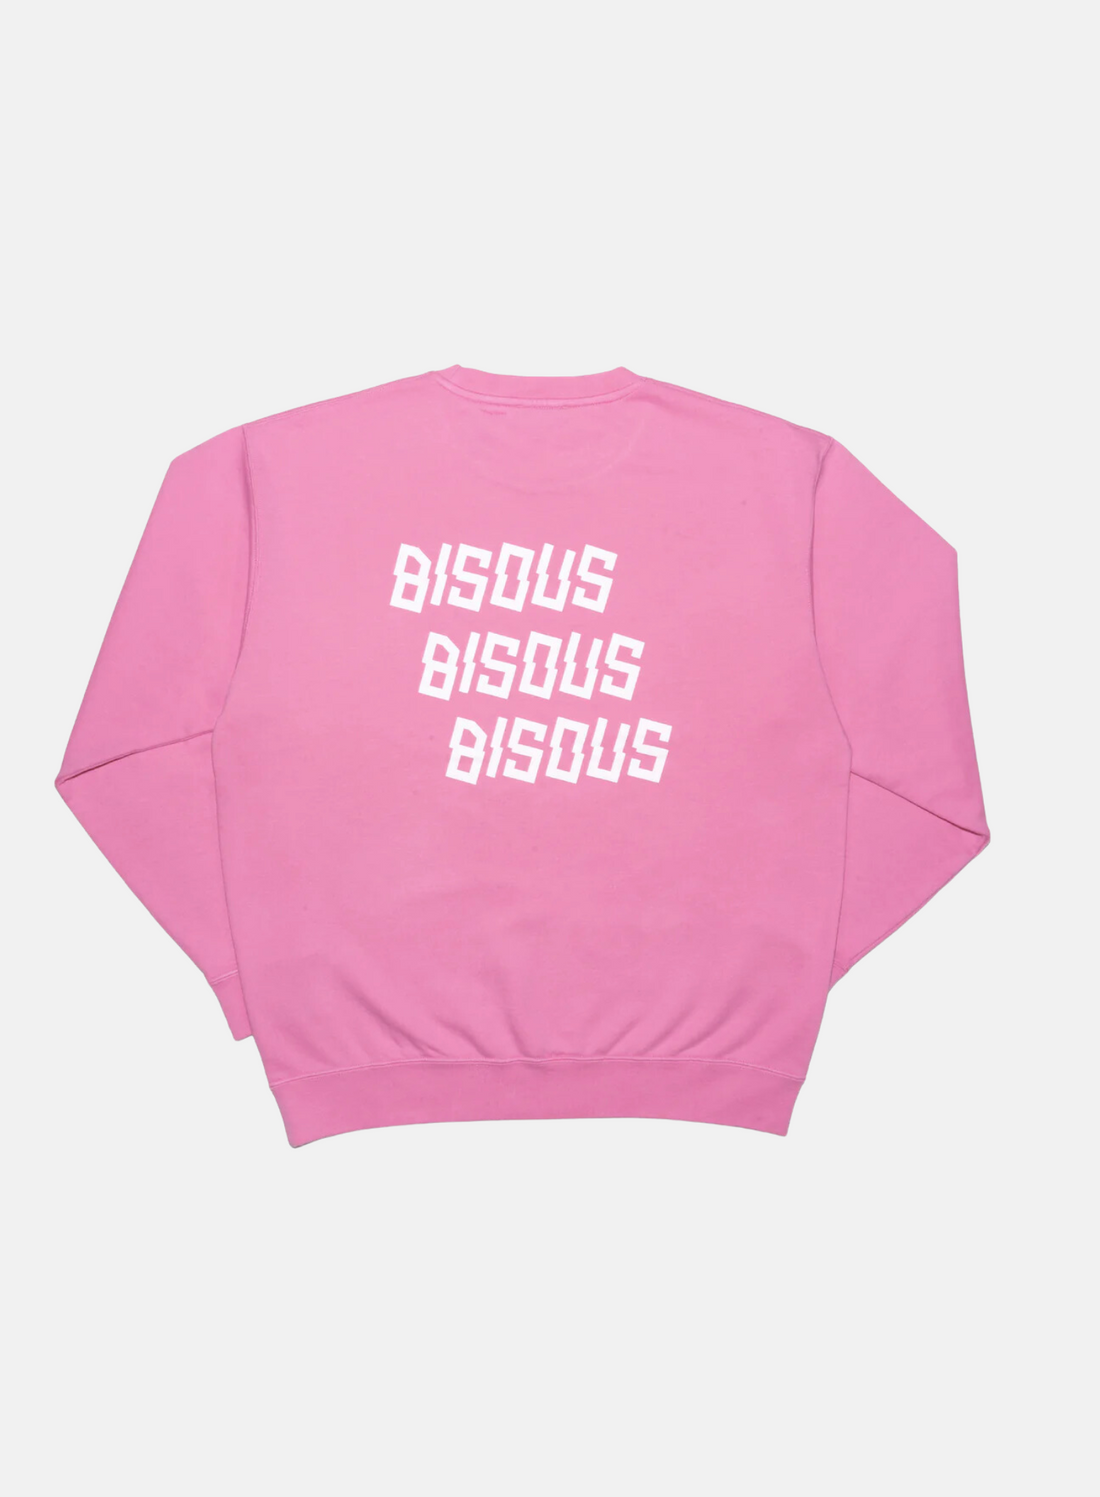 BISOUS SKATEBOARDS Bisous X3 Crewneck Pink - Hympala Store 